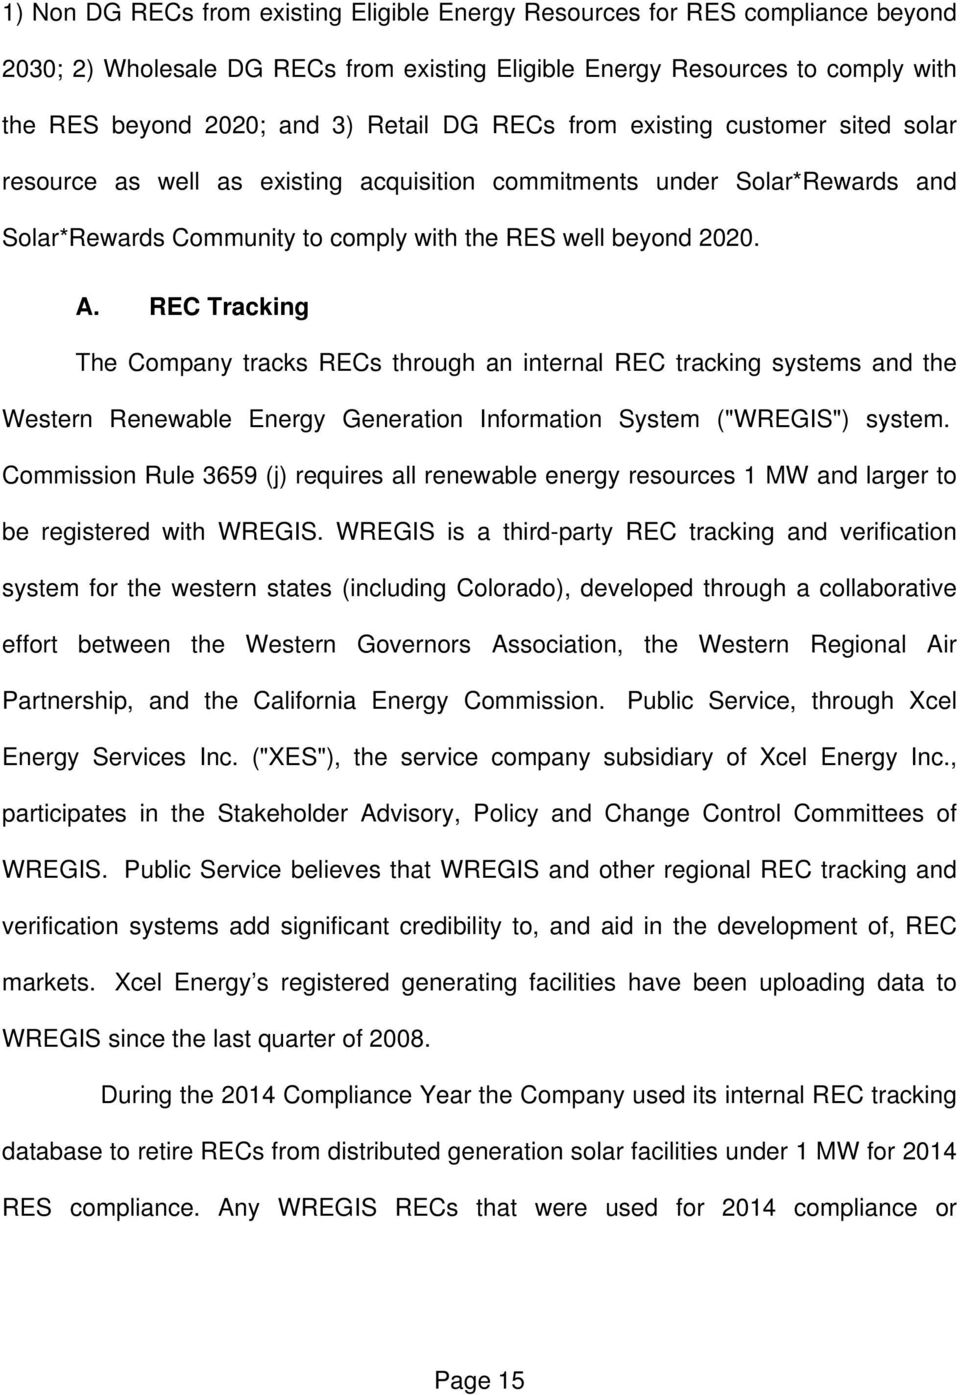 REC Tracking The Company tracks RECs through an internal REC tracking systems and the Western Renewable Energy Generation Information System ("WREGIS") system.